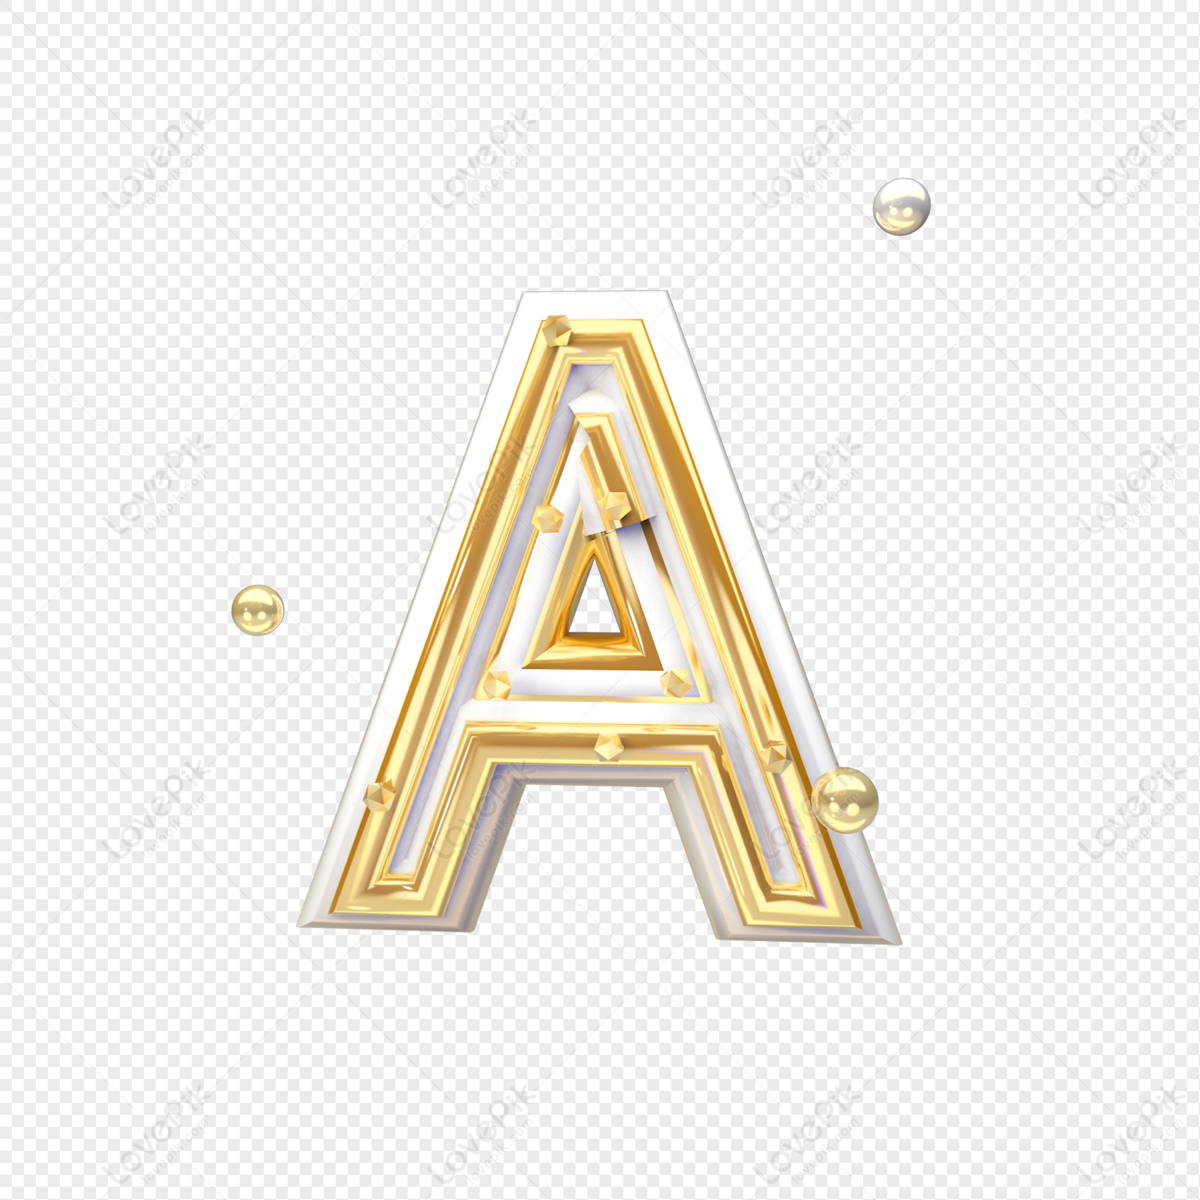 Stylish Three Dimensional Letter Illustration PNG Image Free ...